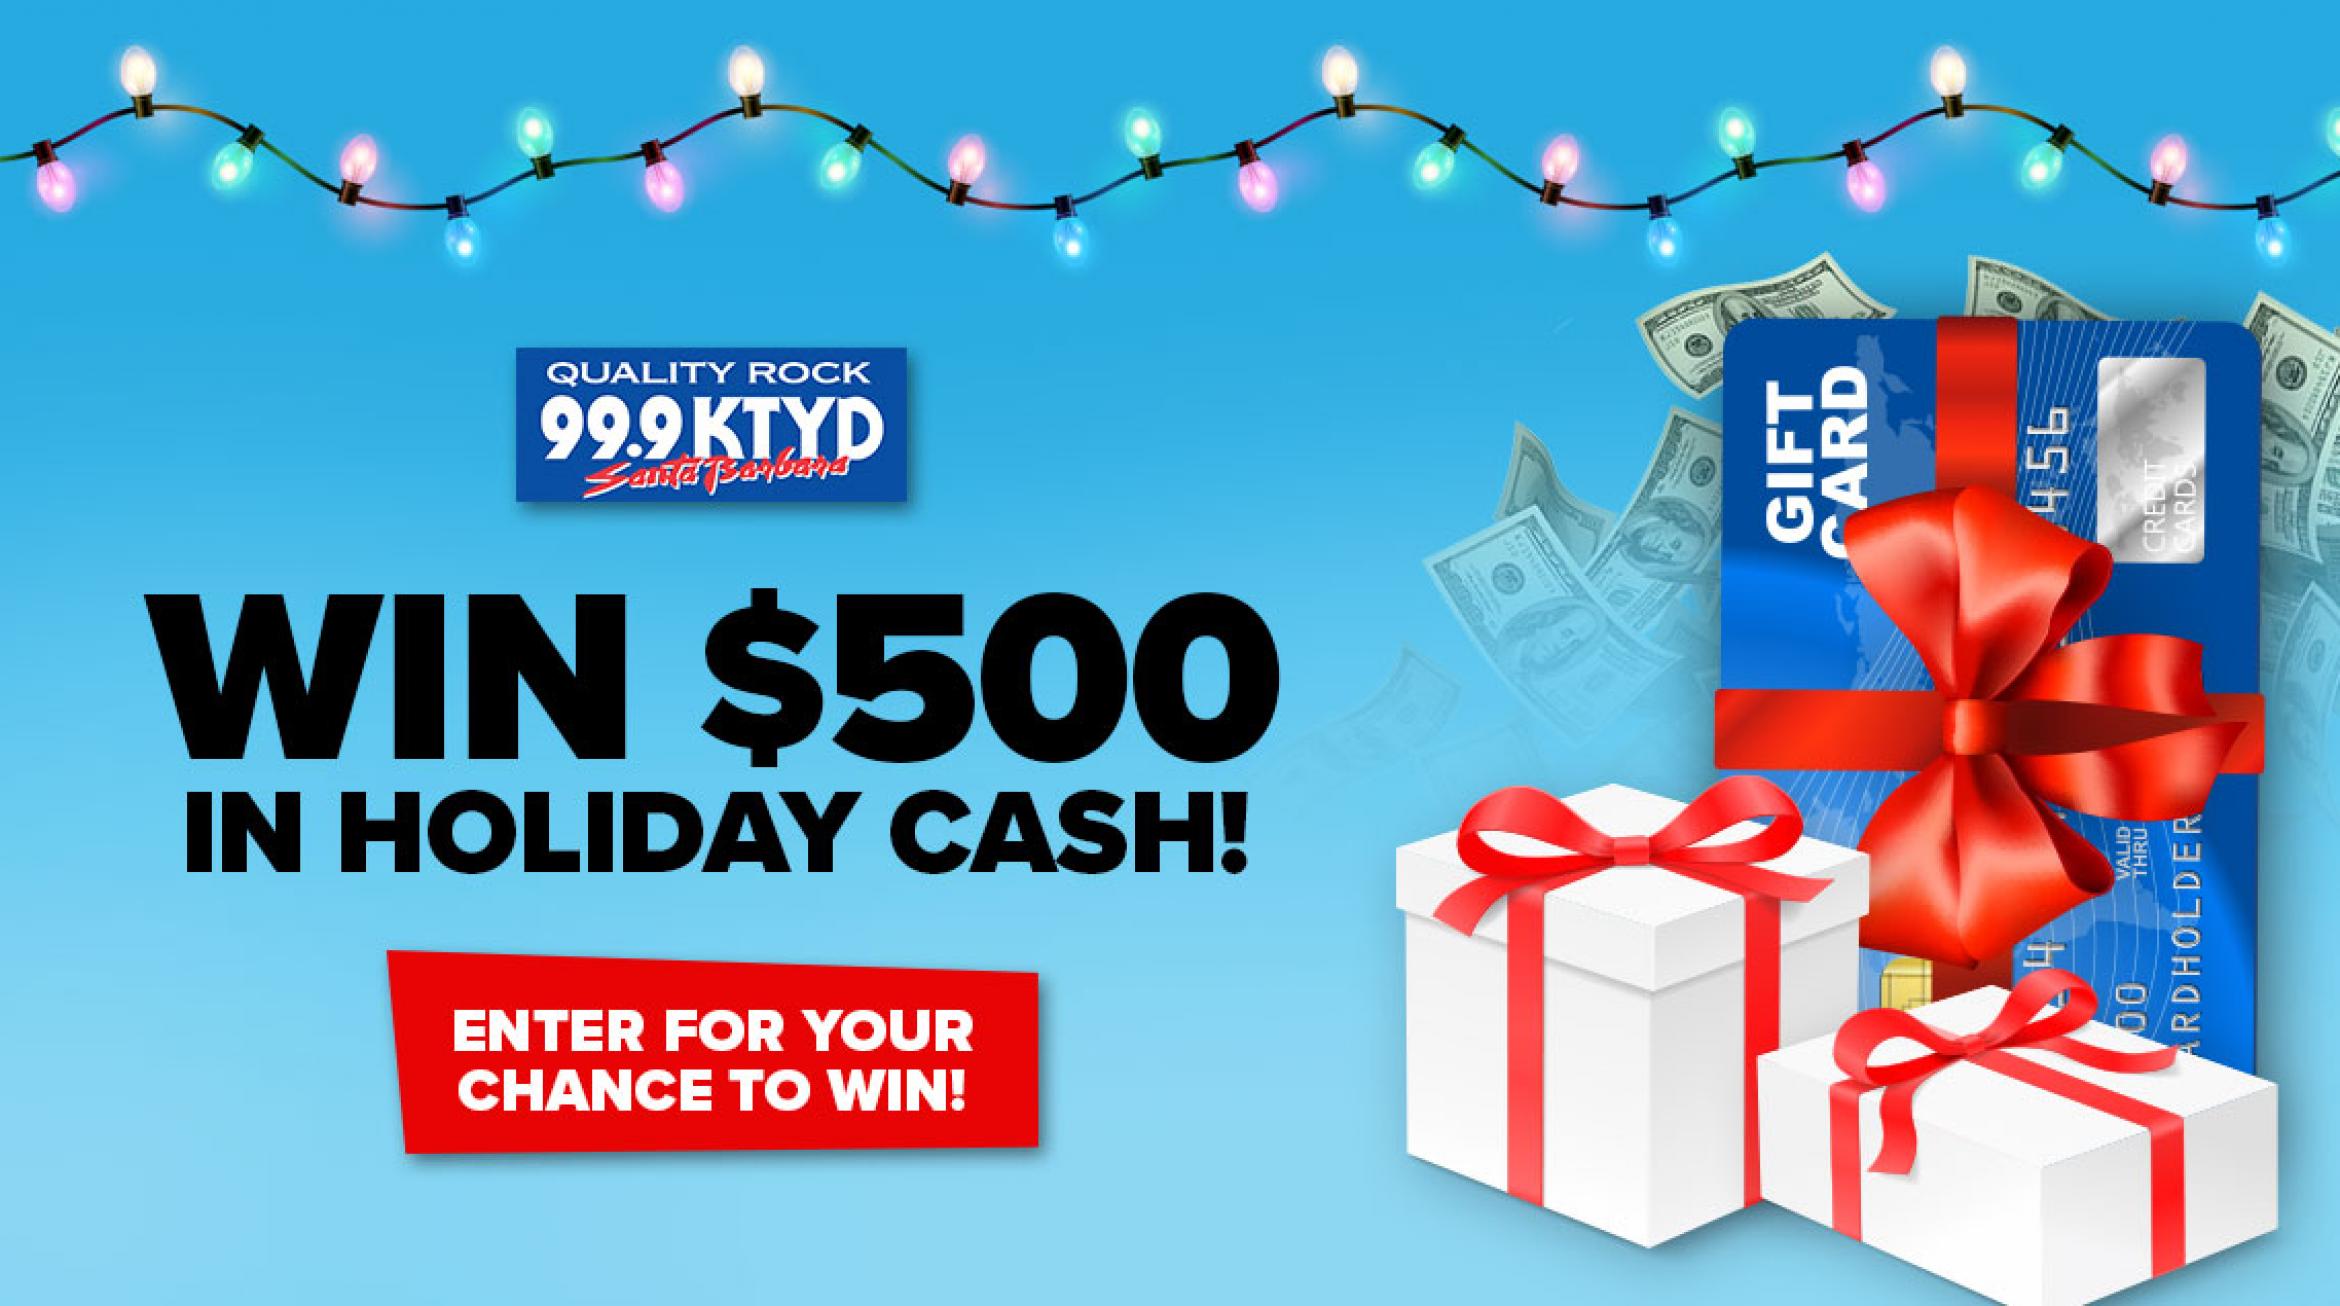 Promo Holiday Cash Giveaway KTYD